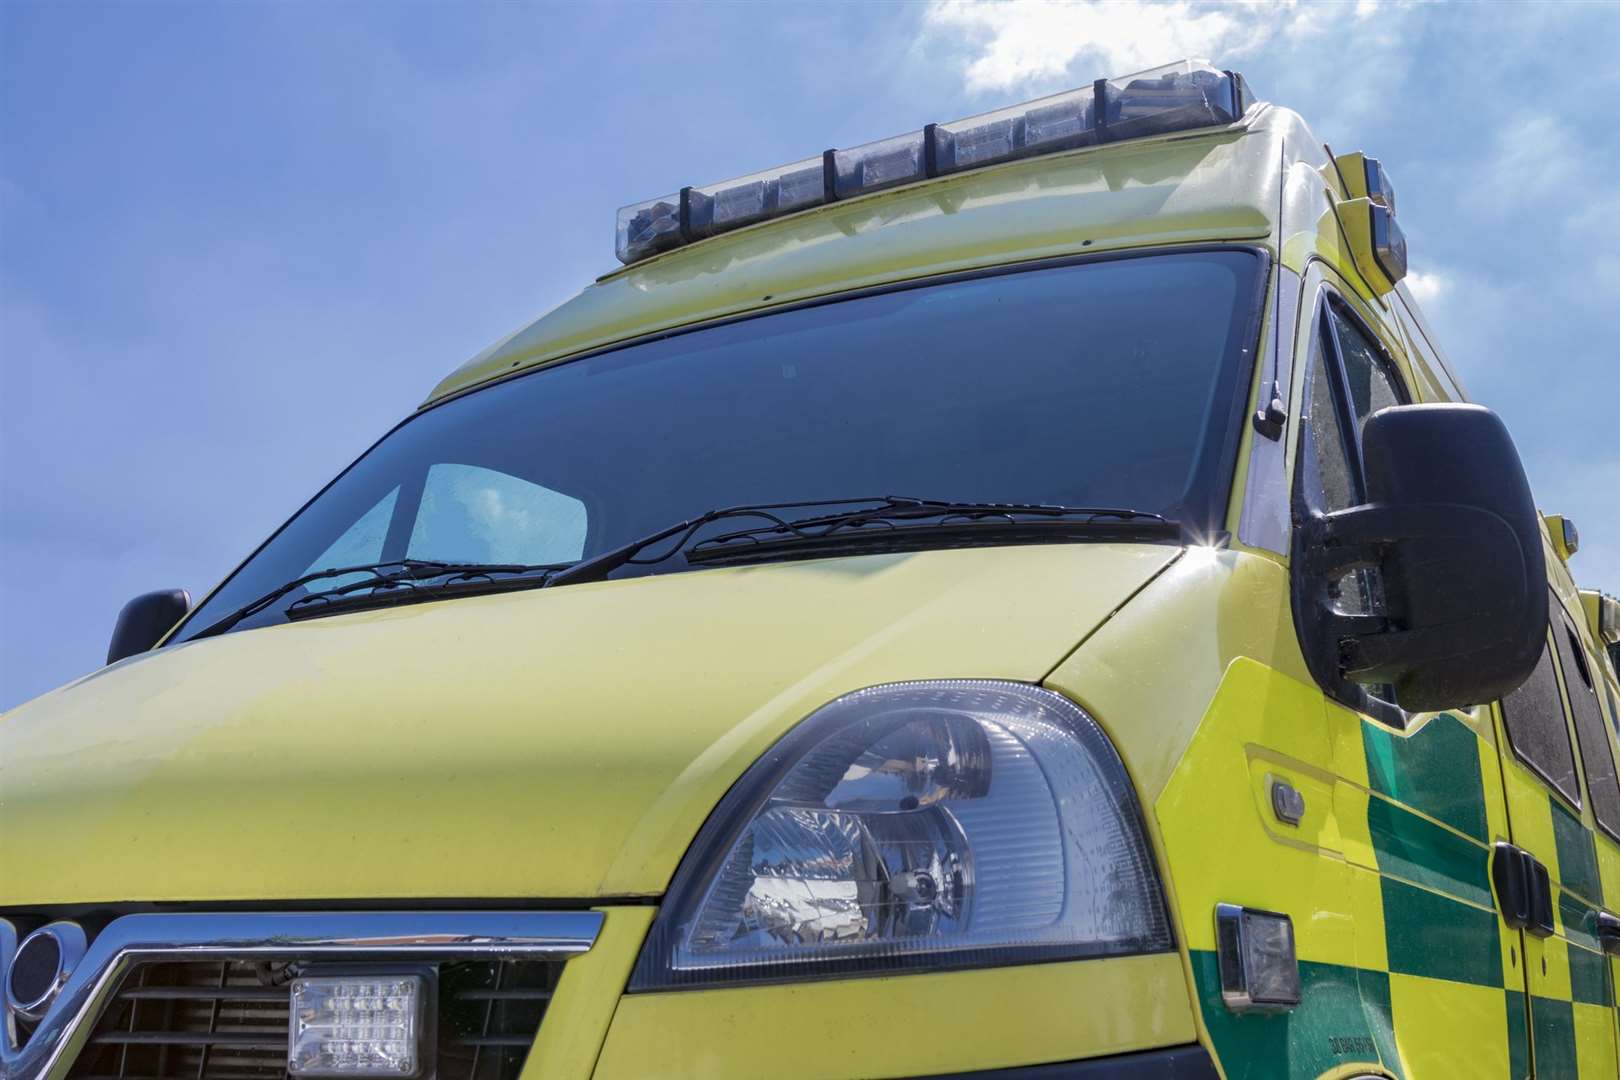 Emergency help can be sent quickly when the eCall system is triggered say motoring experts